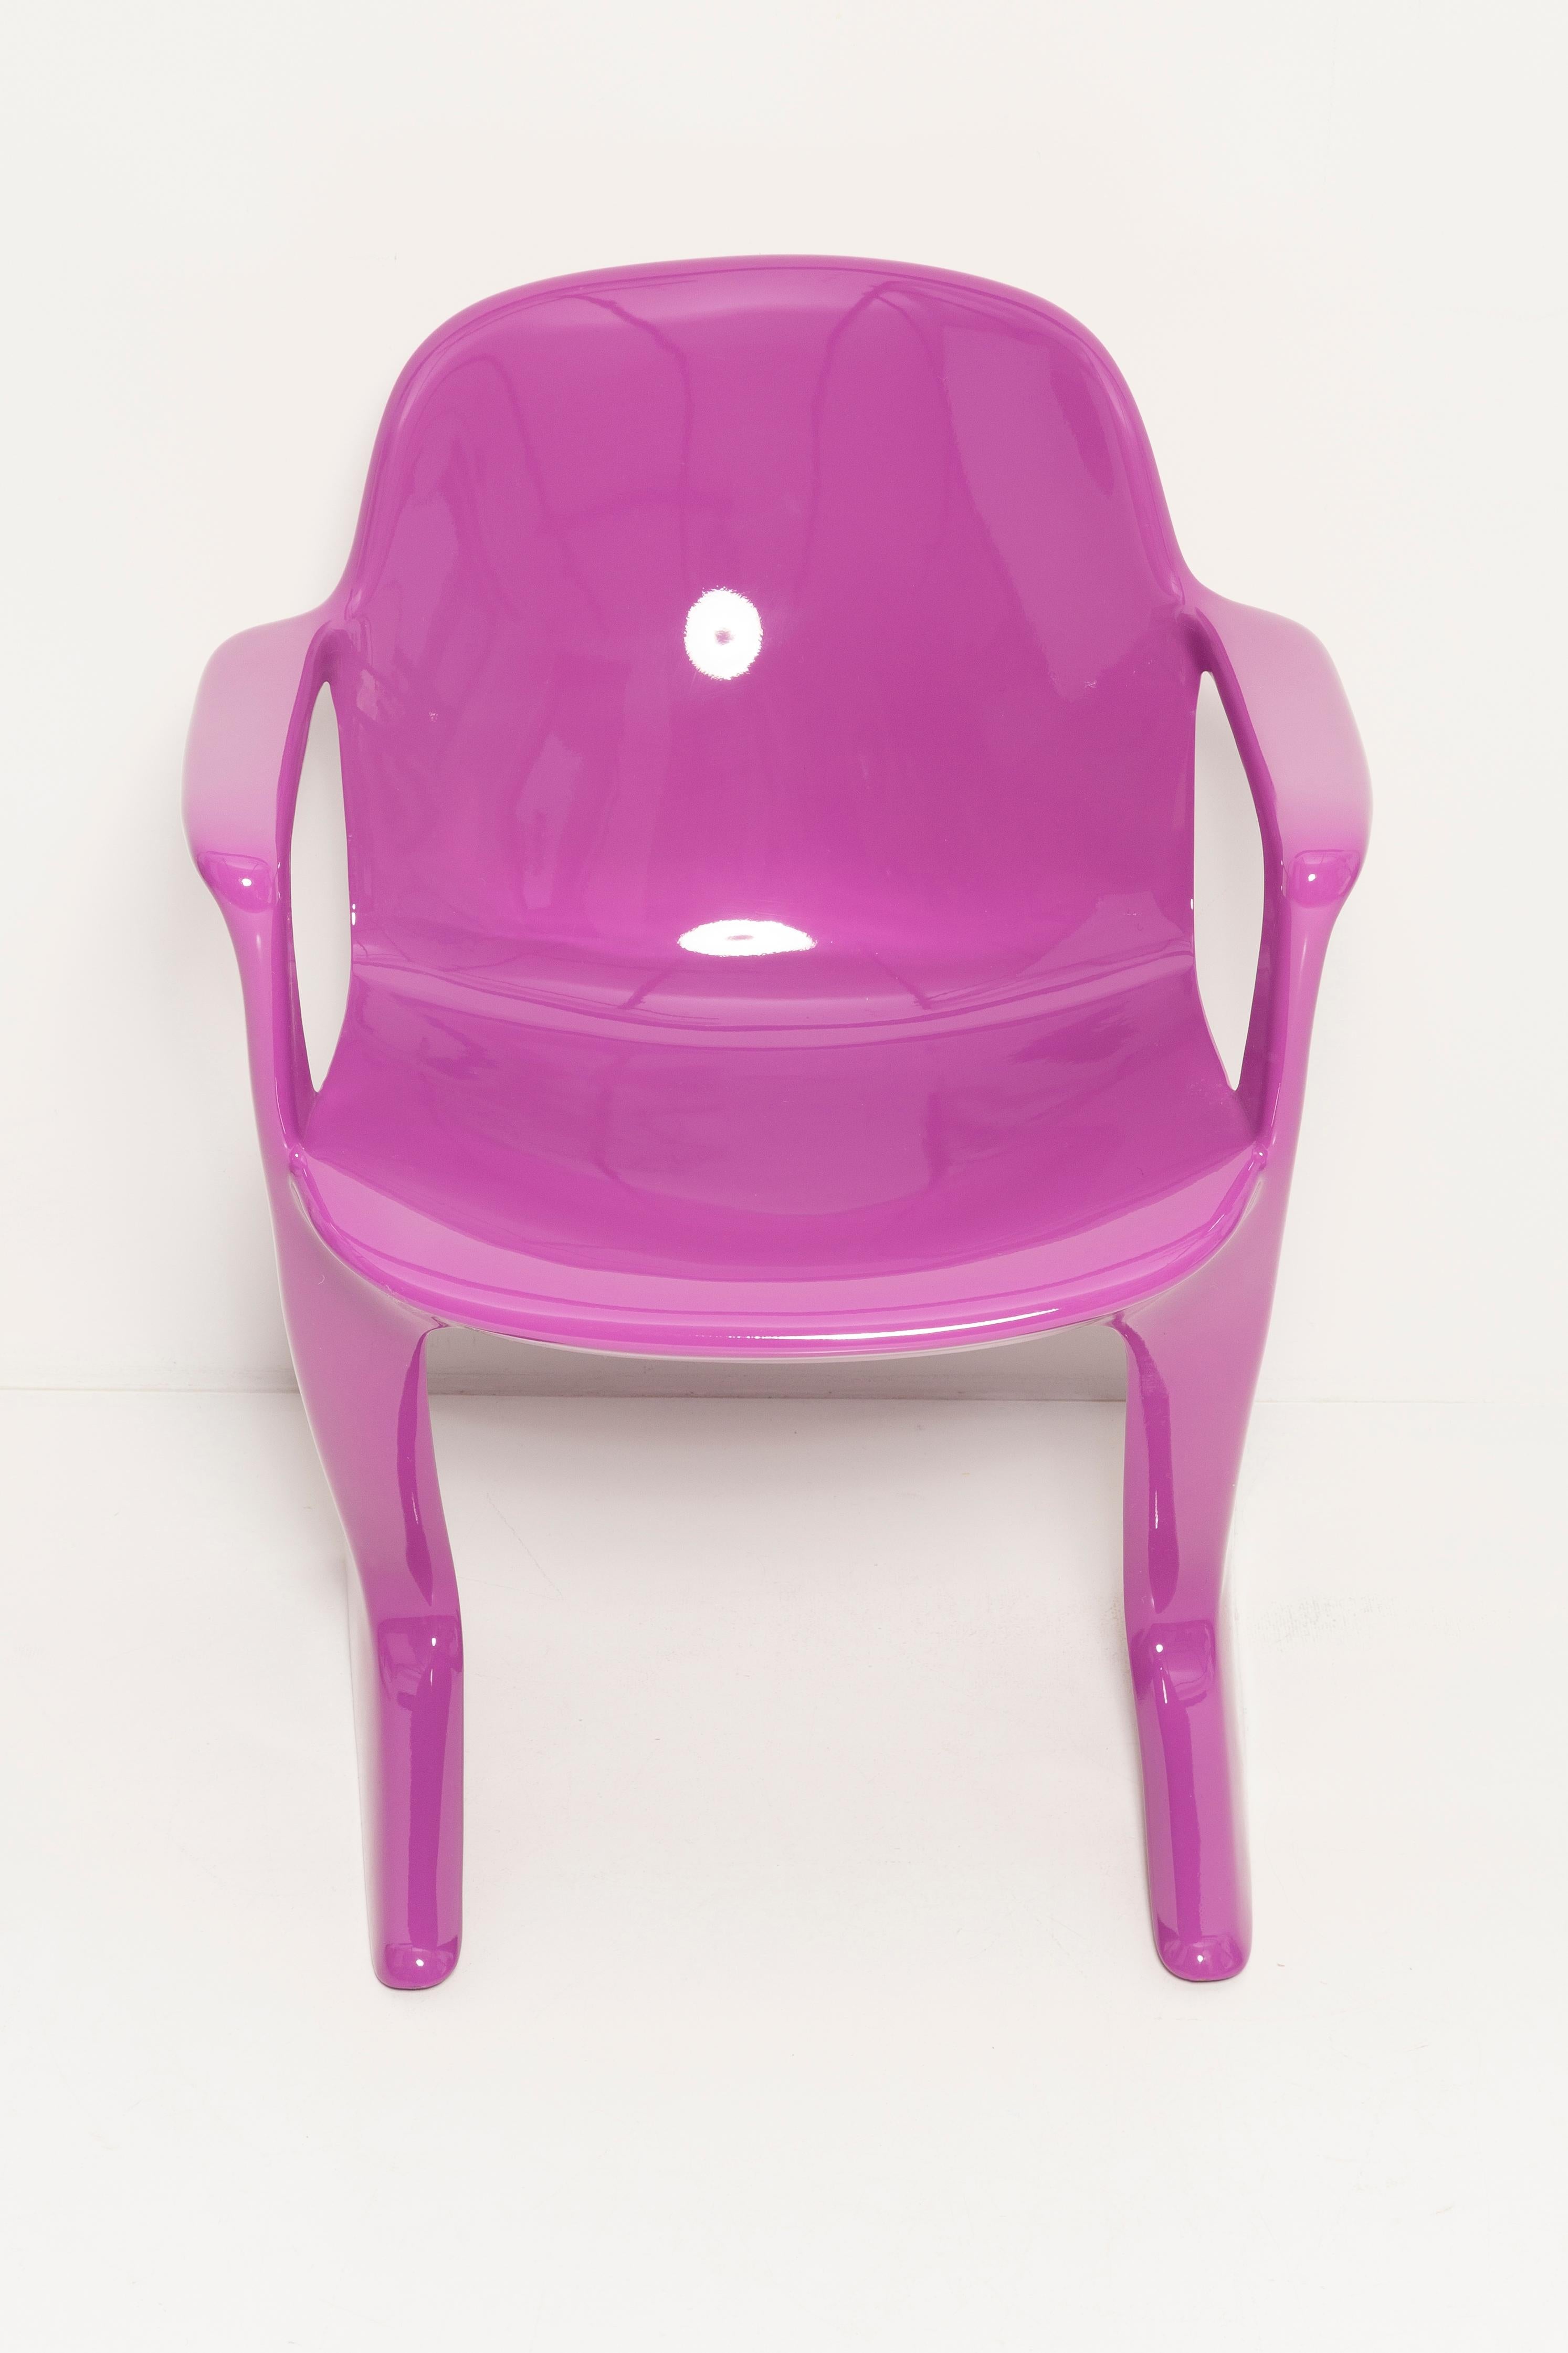 Mid-Century Violet Purple Kangaroo Chair Designed by Ernst Moeckl, Germany, 1968 For Sale 1